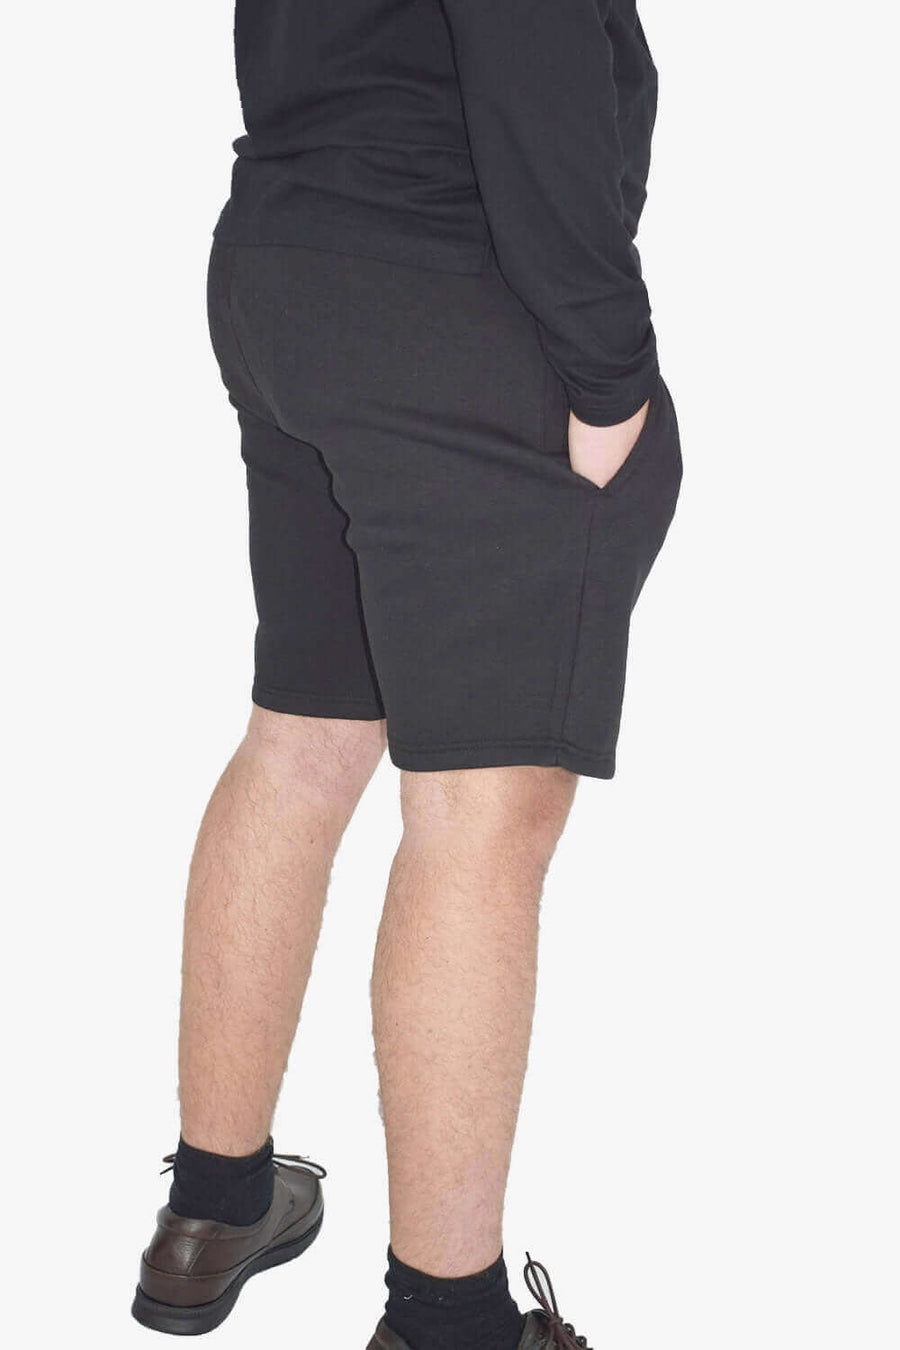 Back Side View of Regular Men's Gym Shorts in Black for Your Active Lifestyle